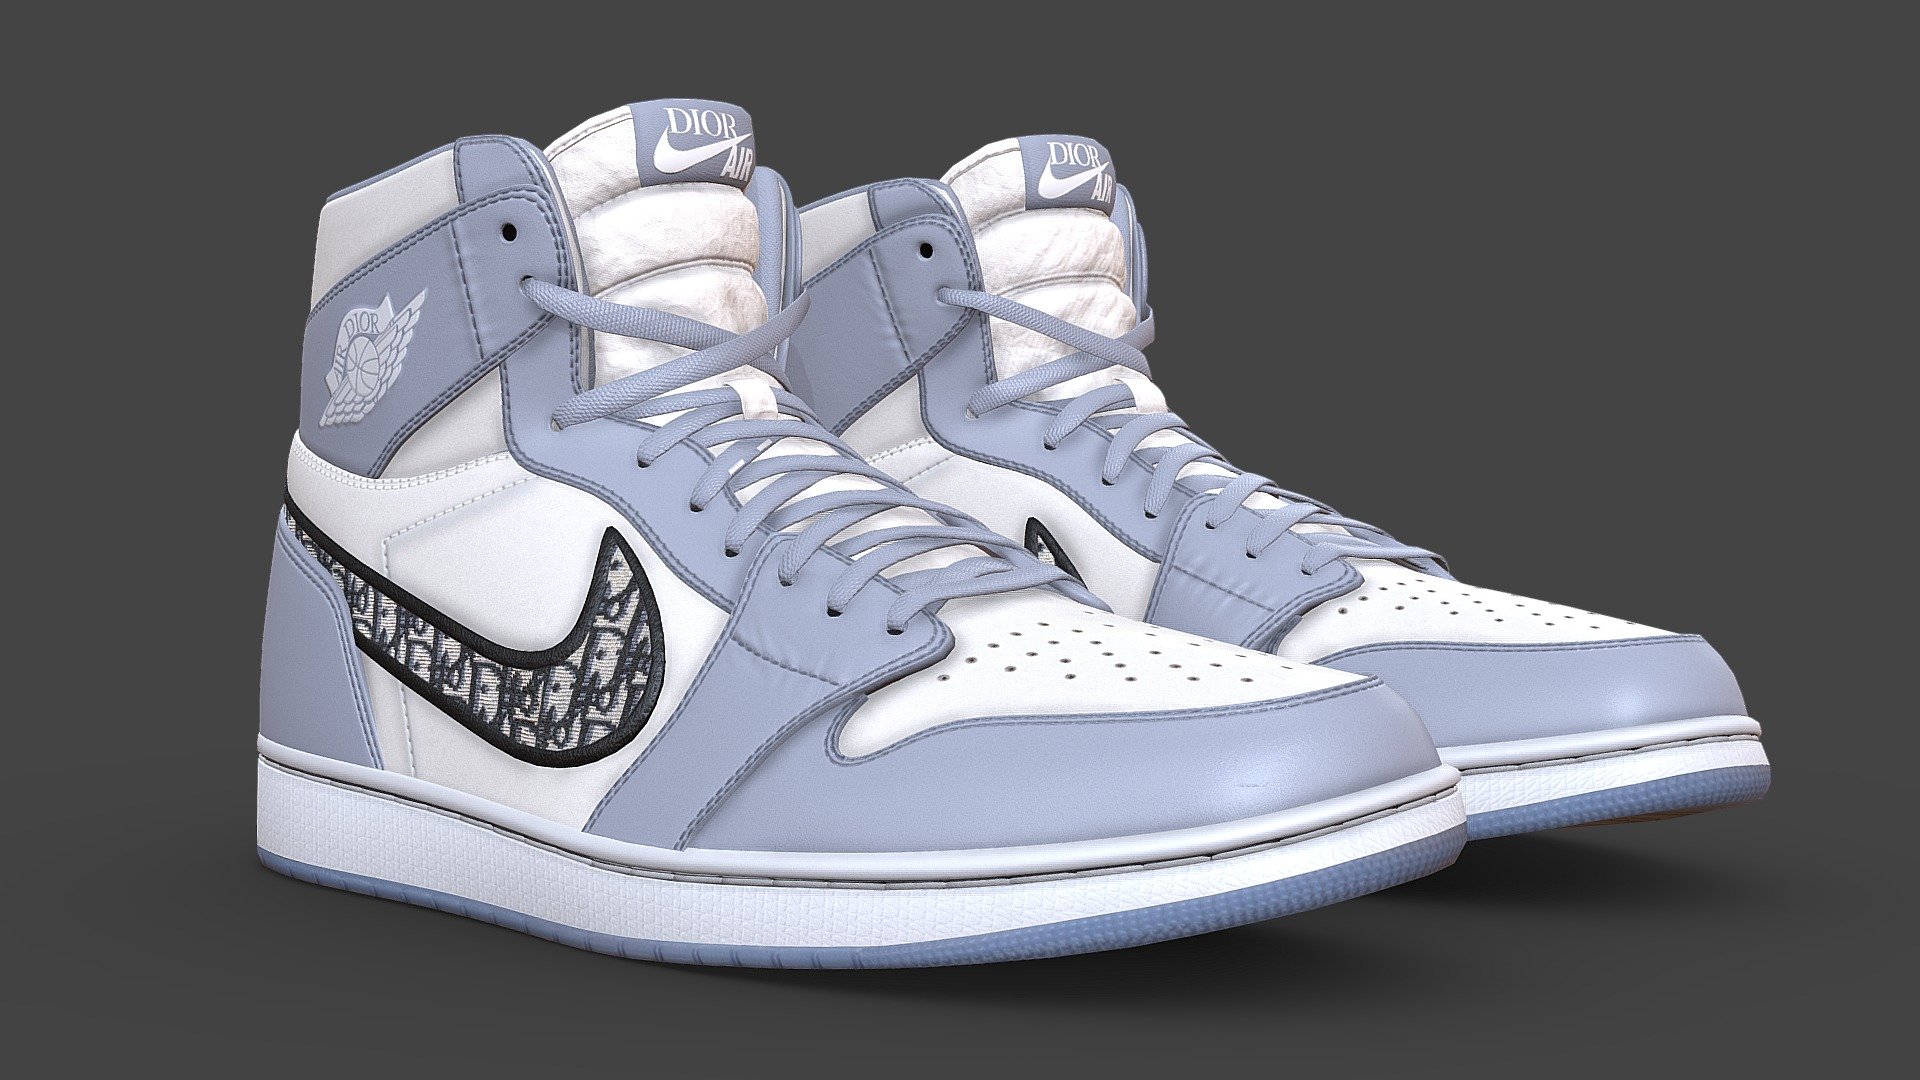 Optimised version of my Jordan 1 Dior shoe model. 

Reduced polycount and uses only two texture sets 

This Low Poly version is also included in the full version available here:
https://sketchfab.com/3d-models/jordan-1-dior-bdf67d802f3c4b6d98194f0349df21cf - Jordan 1 Dior Game Ready - 3D model by Joe-Wall (@joewall) 3d model